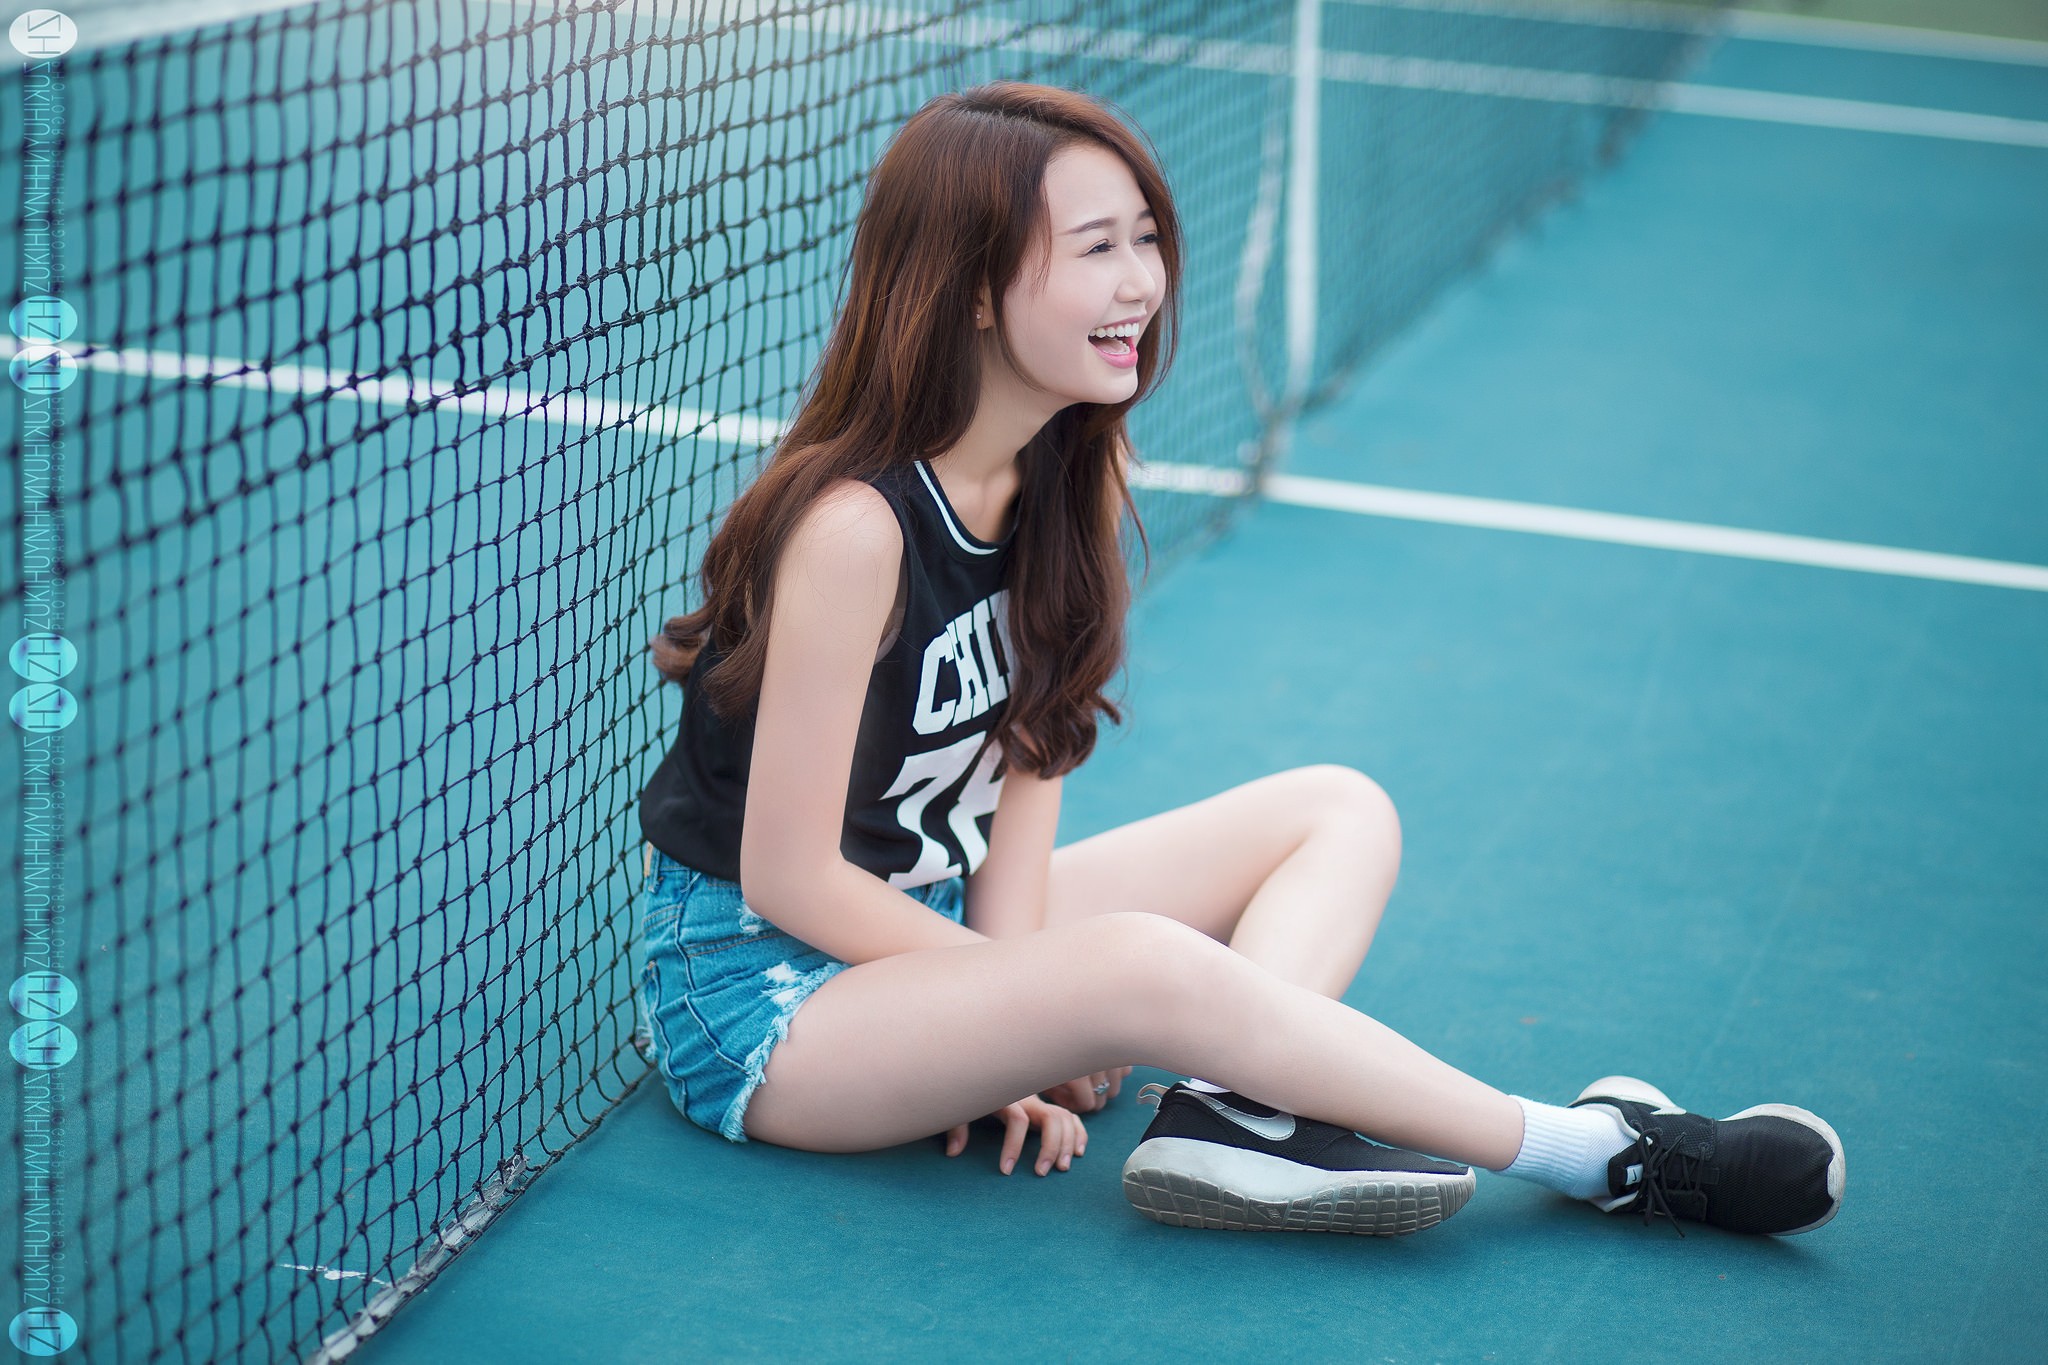 Laughing Sitting Tennis Courts Long Hair Shoes Model Blue 2048x1365